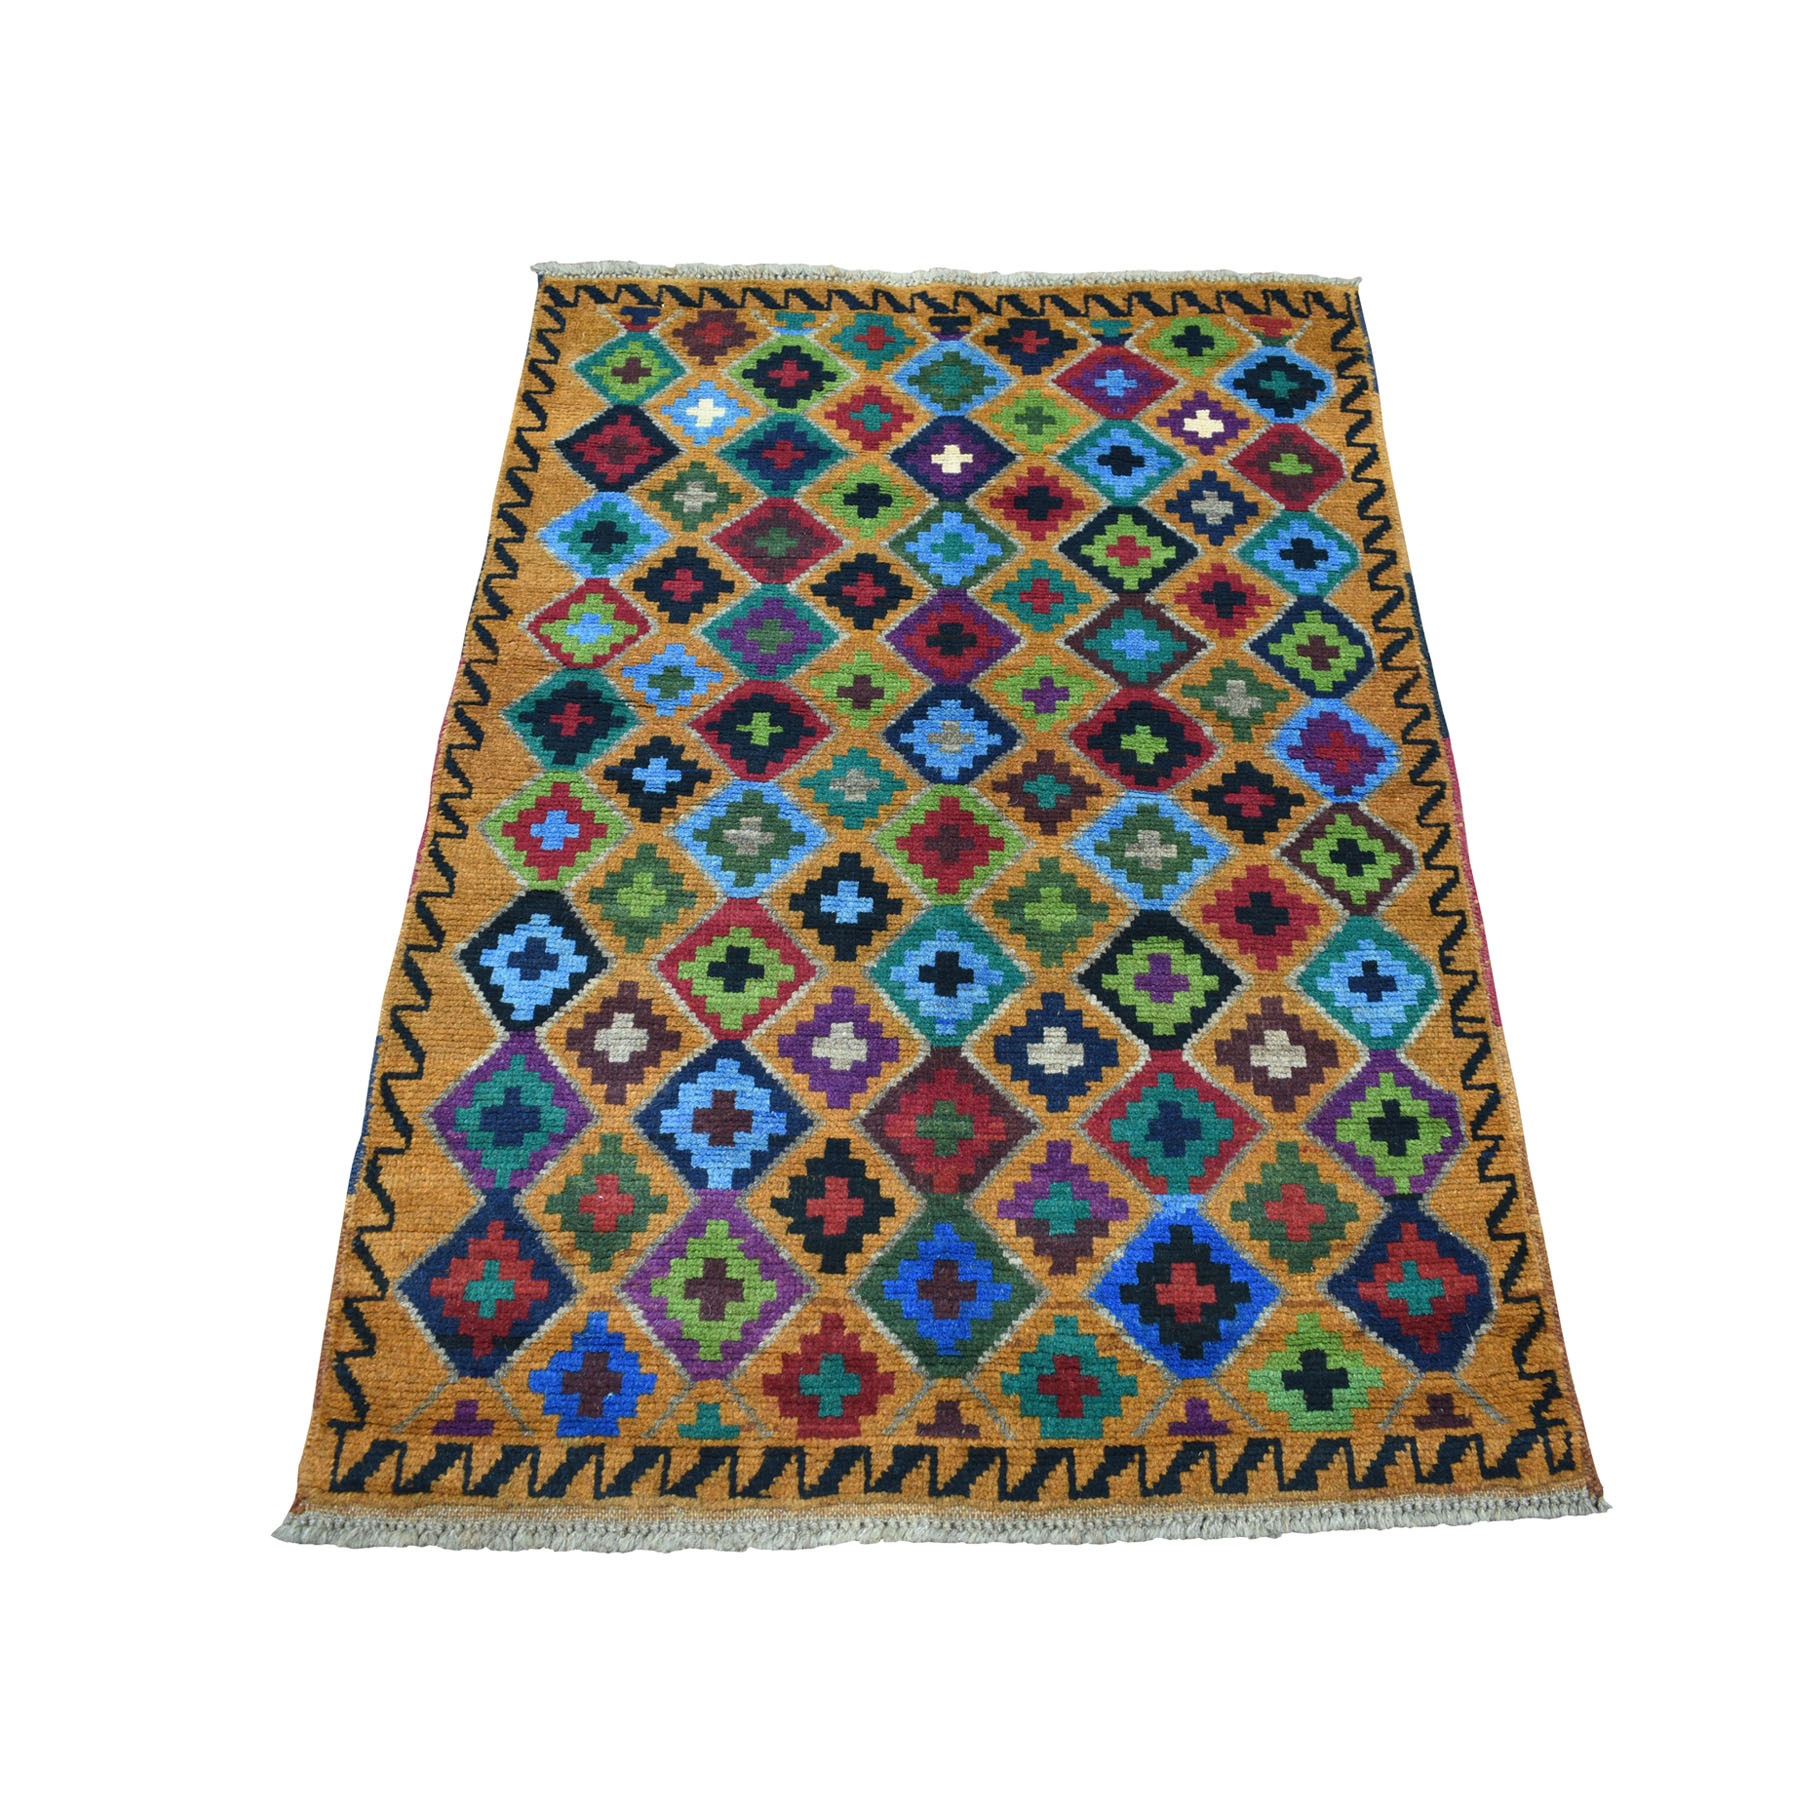 3'4"x4'8" Brown Tribal Design Colorful Afghan Baluch 100% Wool Hand Woven Oriental Rug 